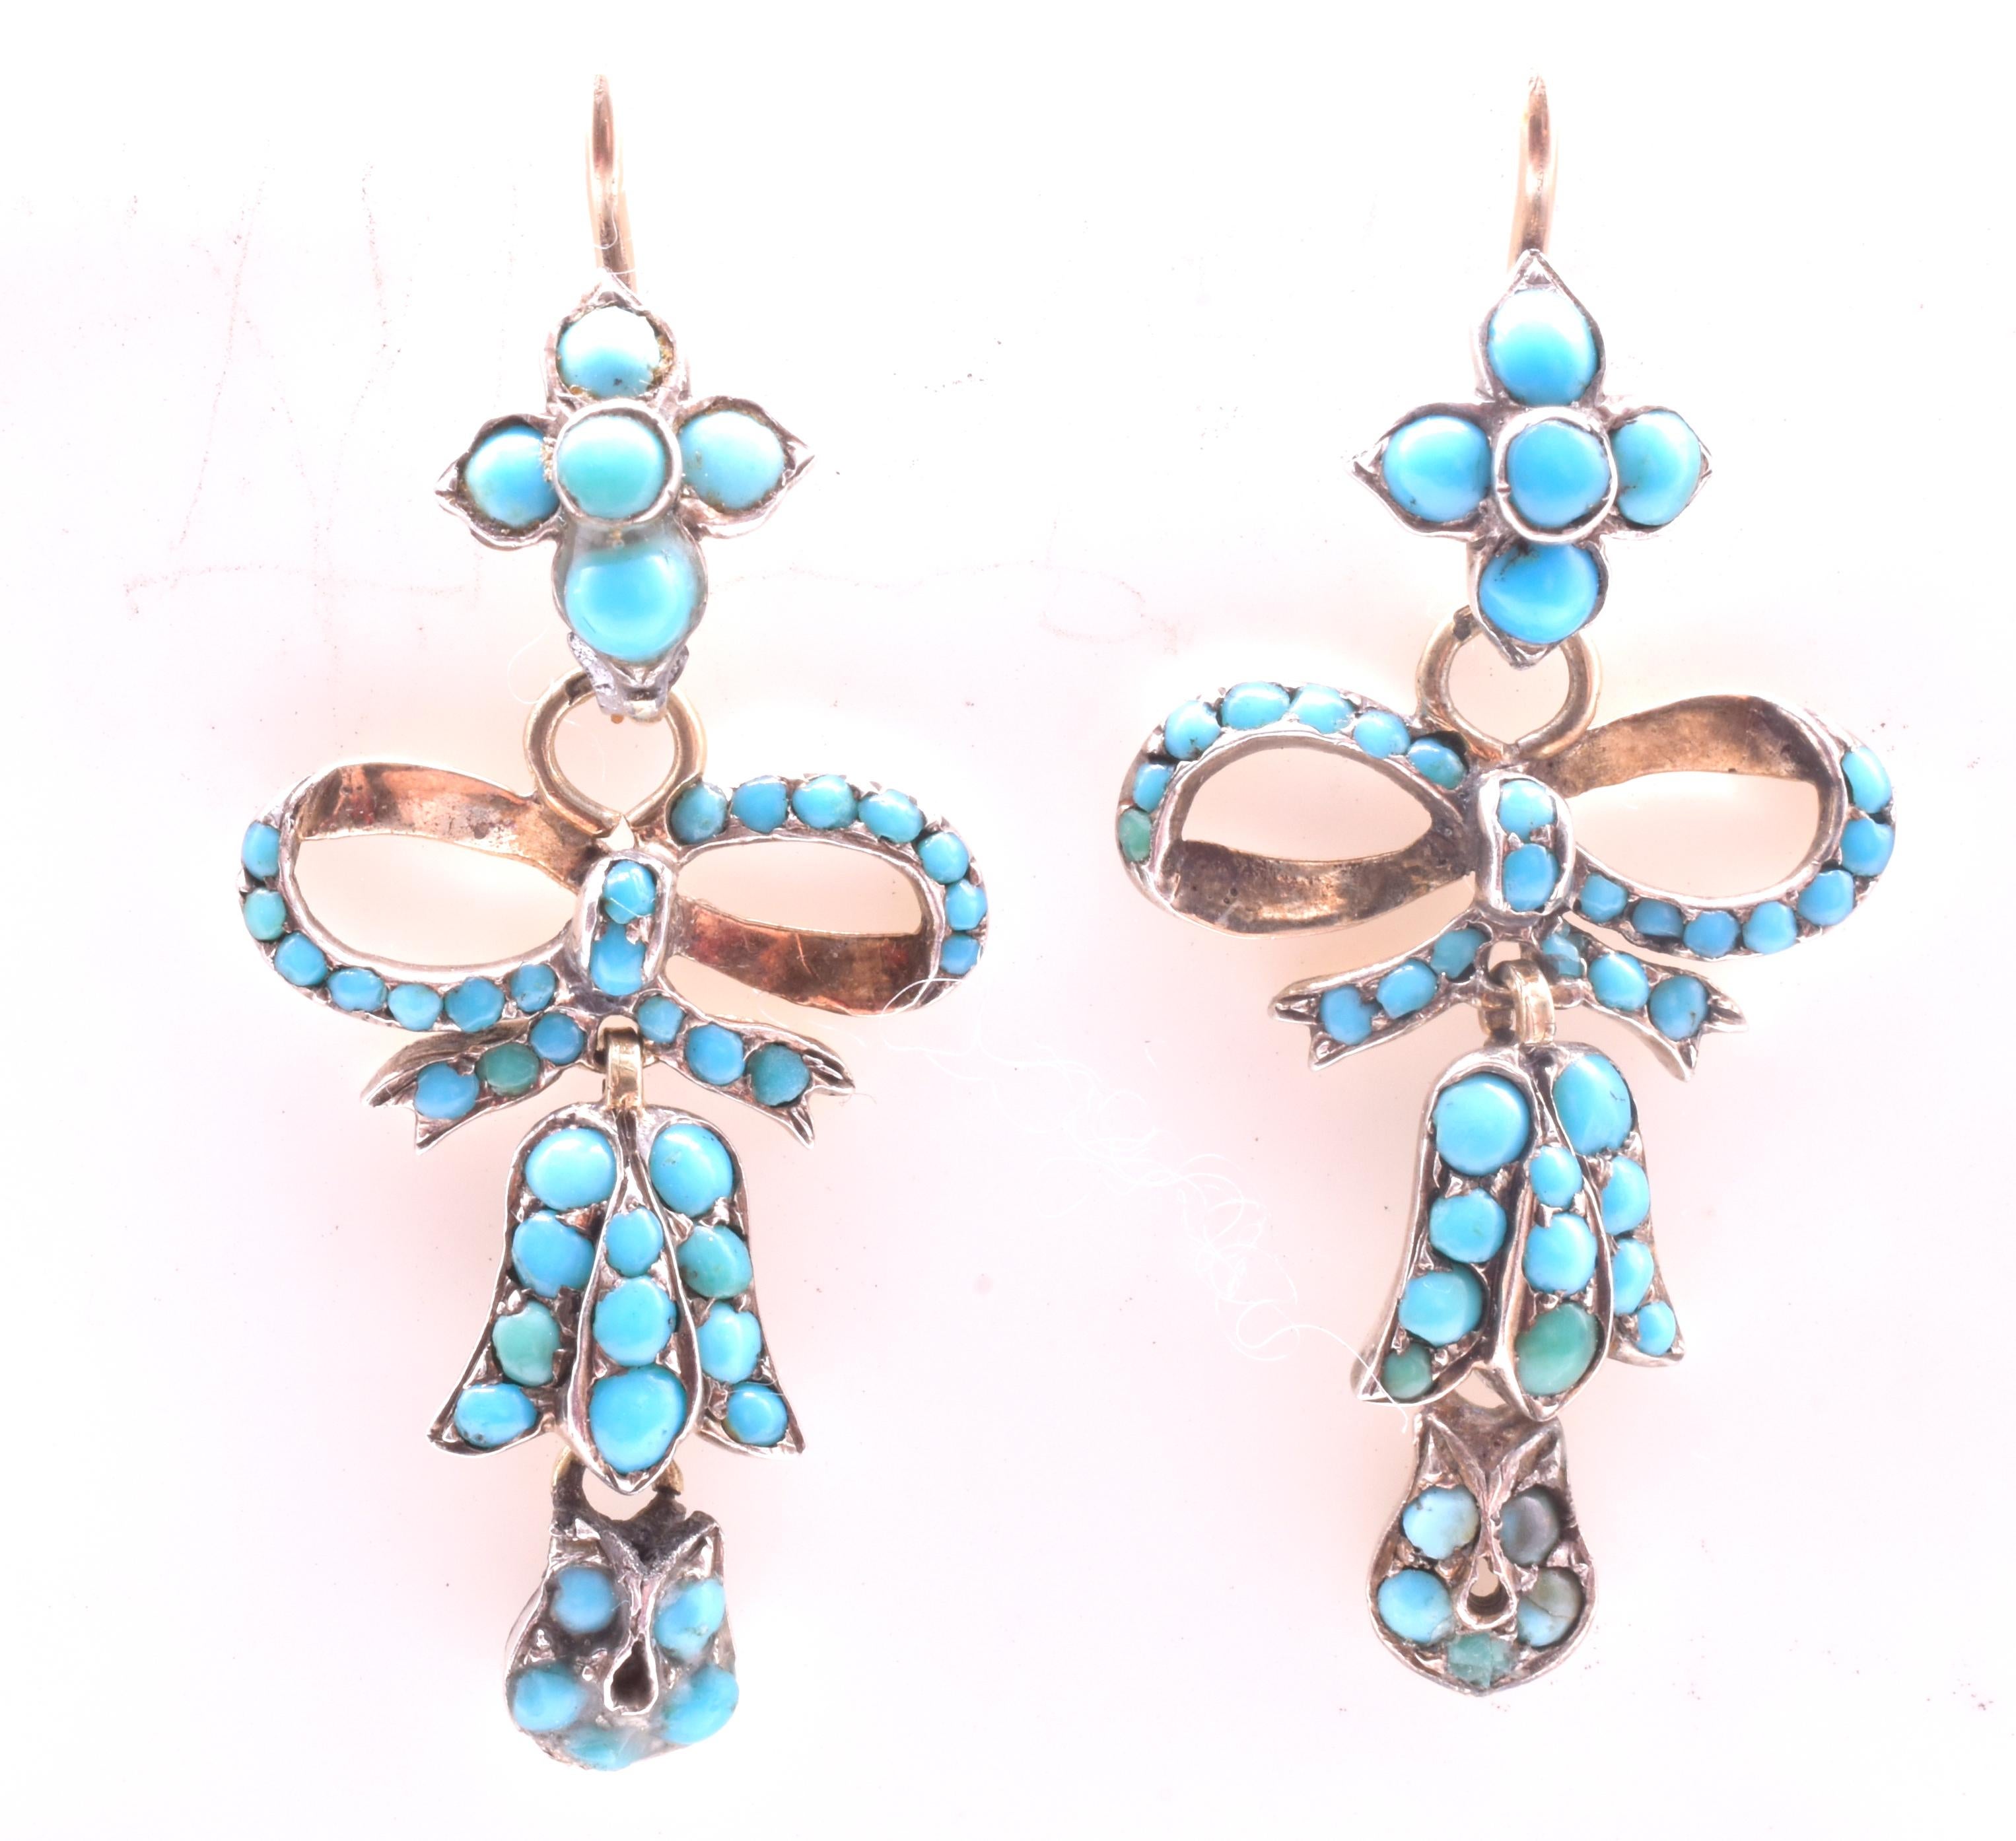 Charming Victorian turquoise silver gilt drop earrings, with daisy form tops and bow bottoms, circa 1880. The earrings are attached to gold shepherds hooks and are 1.4 inches long. Turquoise was considered sentimental love jewelry and the